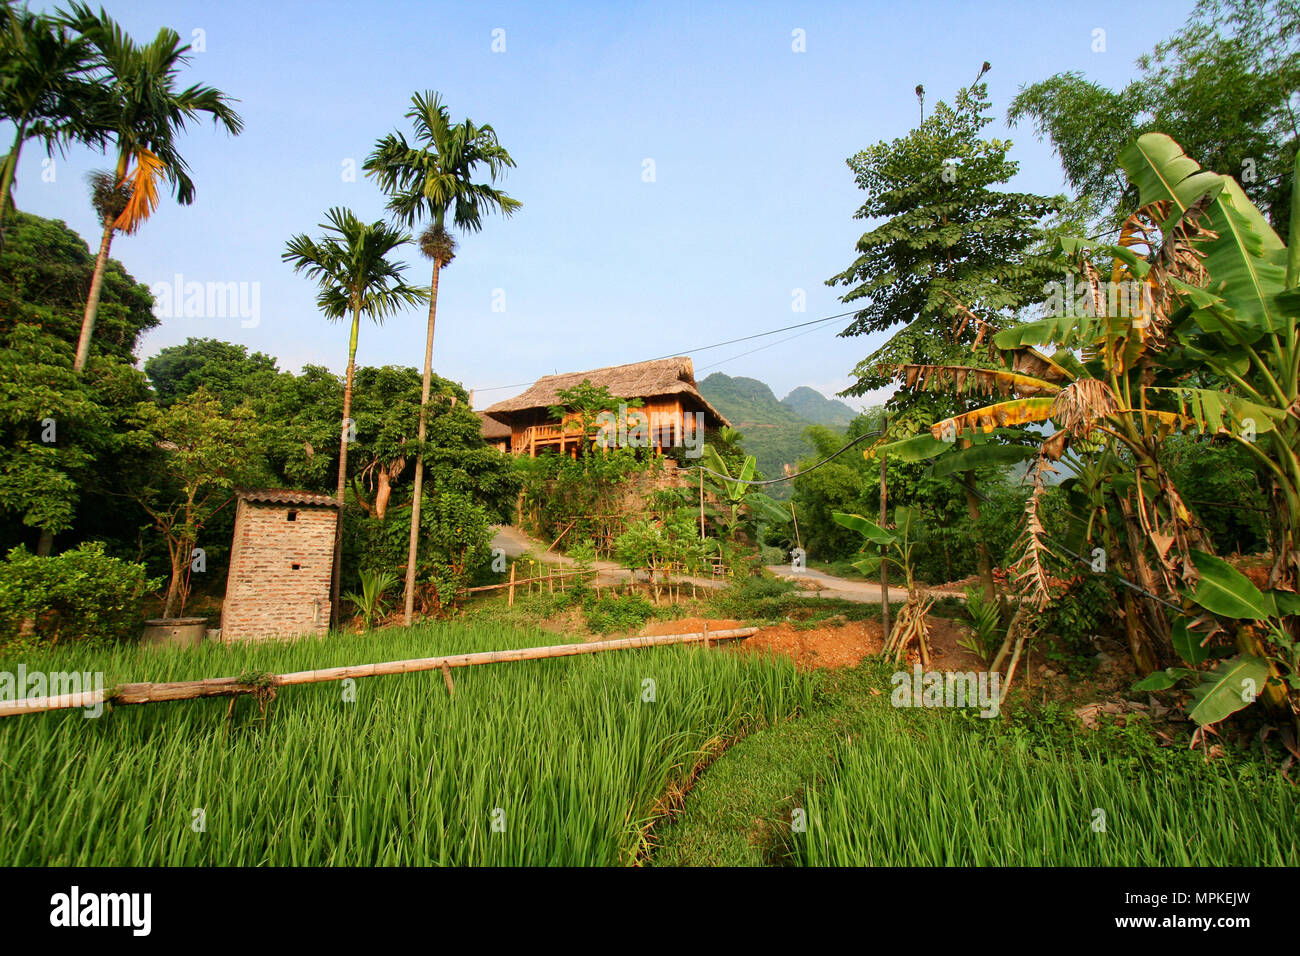 Paddy field and house in Vietnam Stock Photo